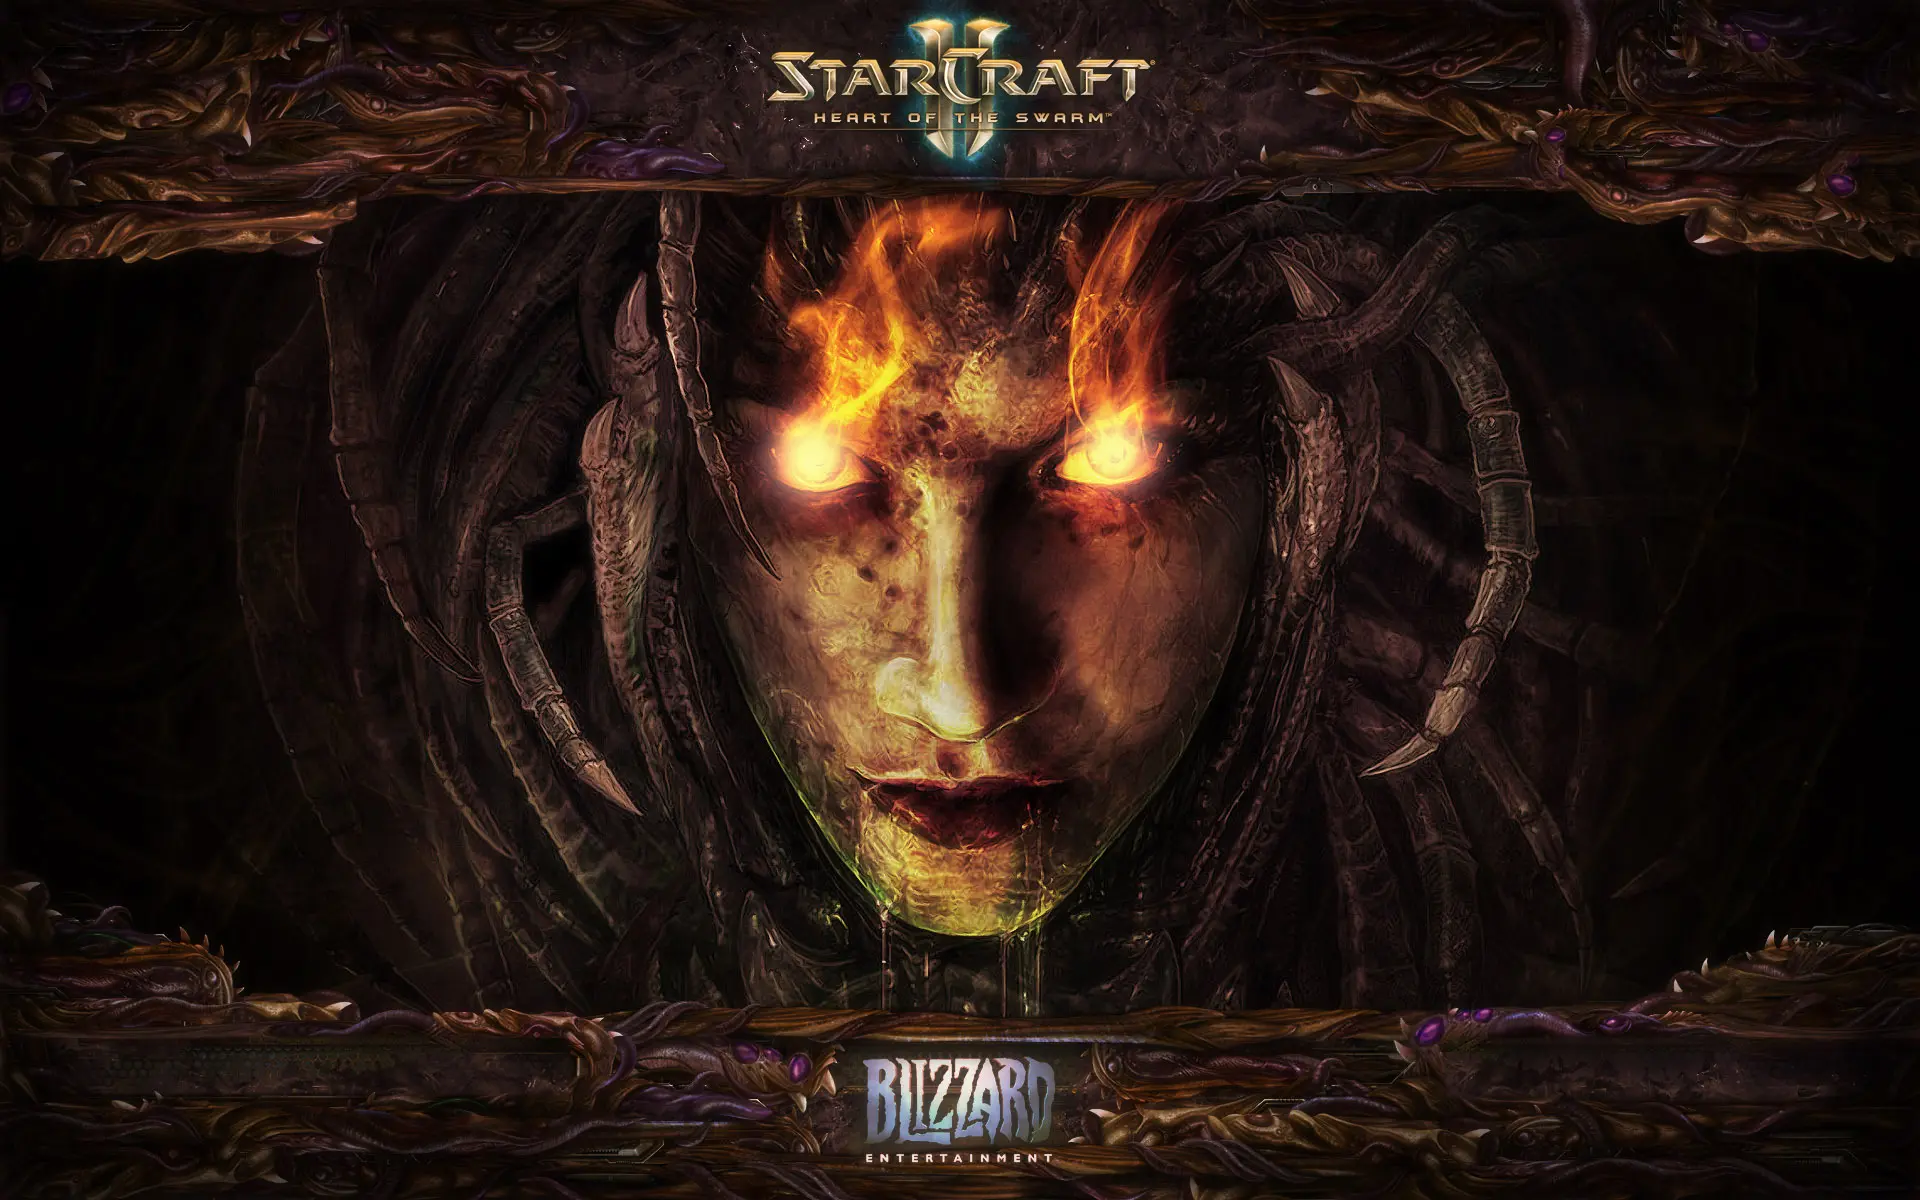 Game Starcraft 2 Heart of the Swarm wallpaper 1 | Background Image